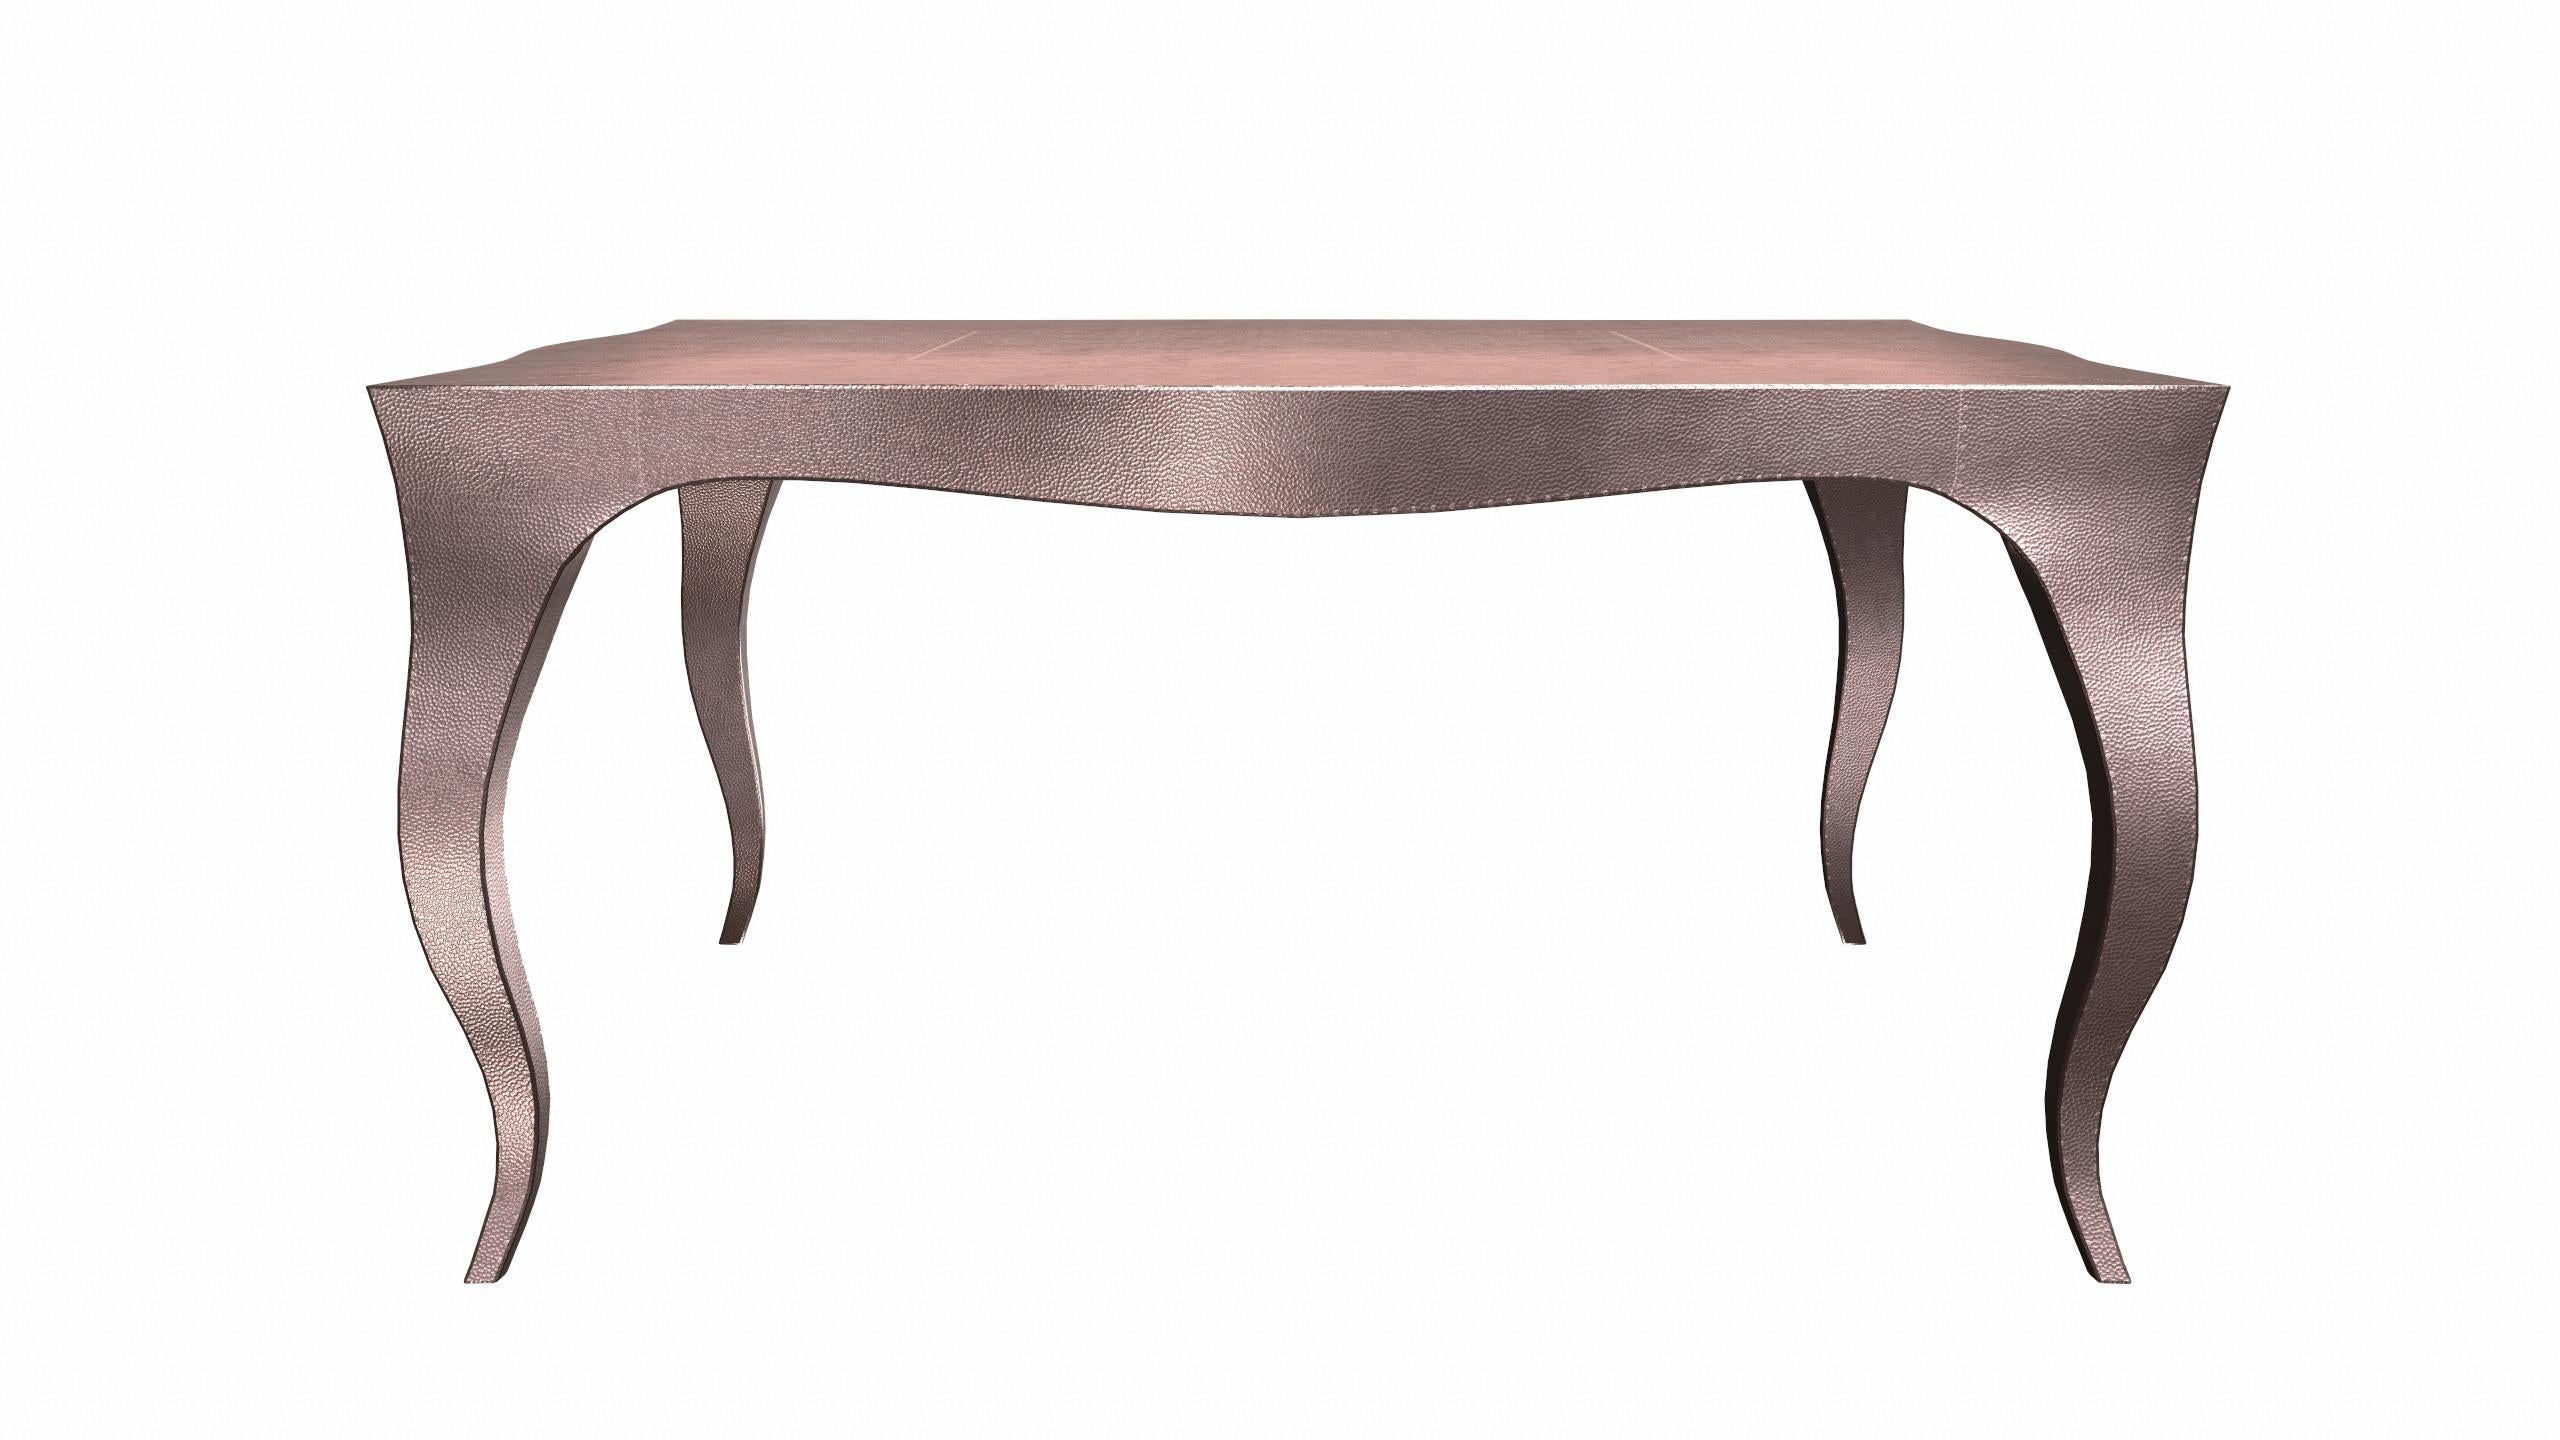 American Louise Art Deco Center Tables Mid. Hammered Copper by Paul Mathieu for S.Odegard For Sale